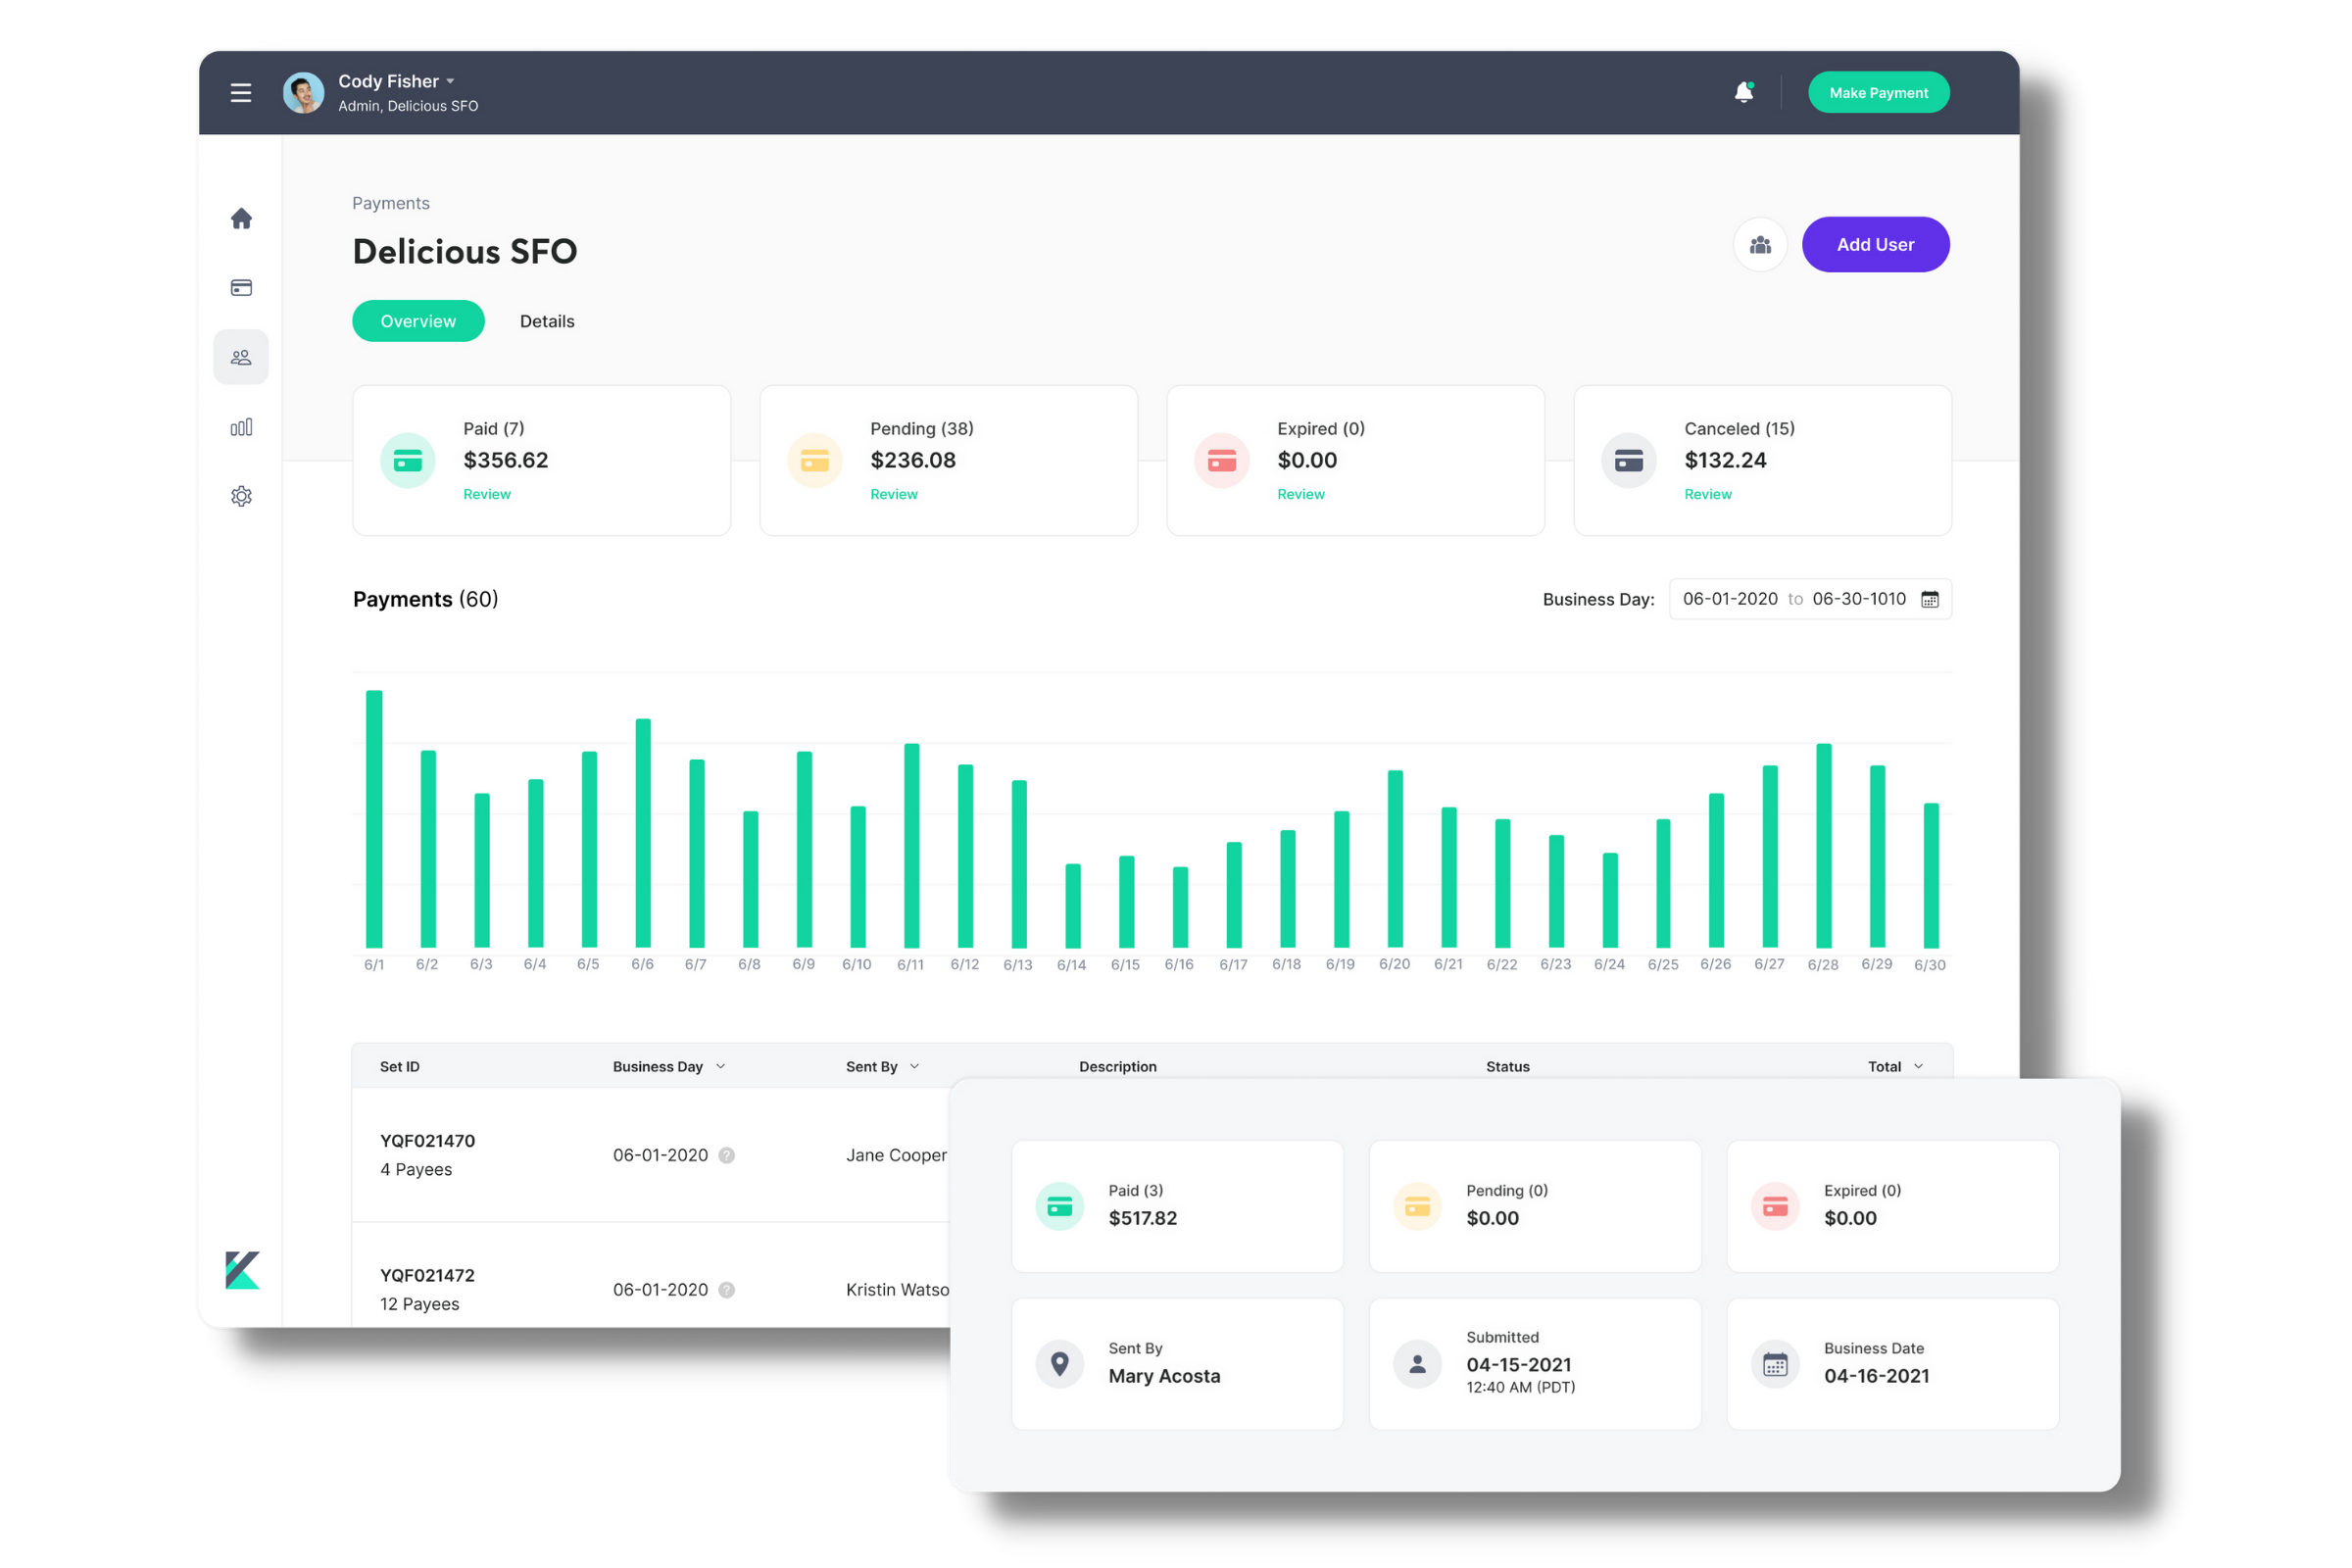 KickFin Software - Kickfin reporting: Kickfin makes tracking and reporting a breeze. You can view the full payment history for your entire organization, for individual locations, and for all employees.